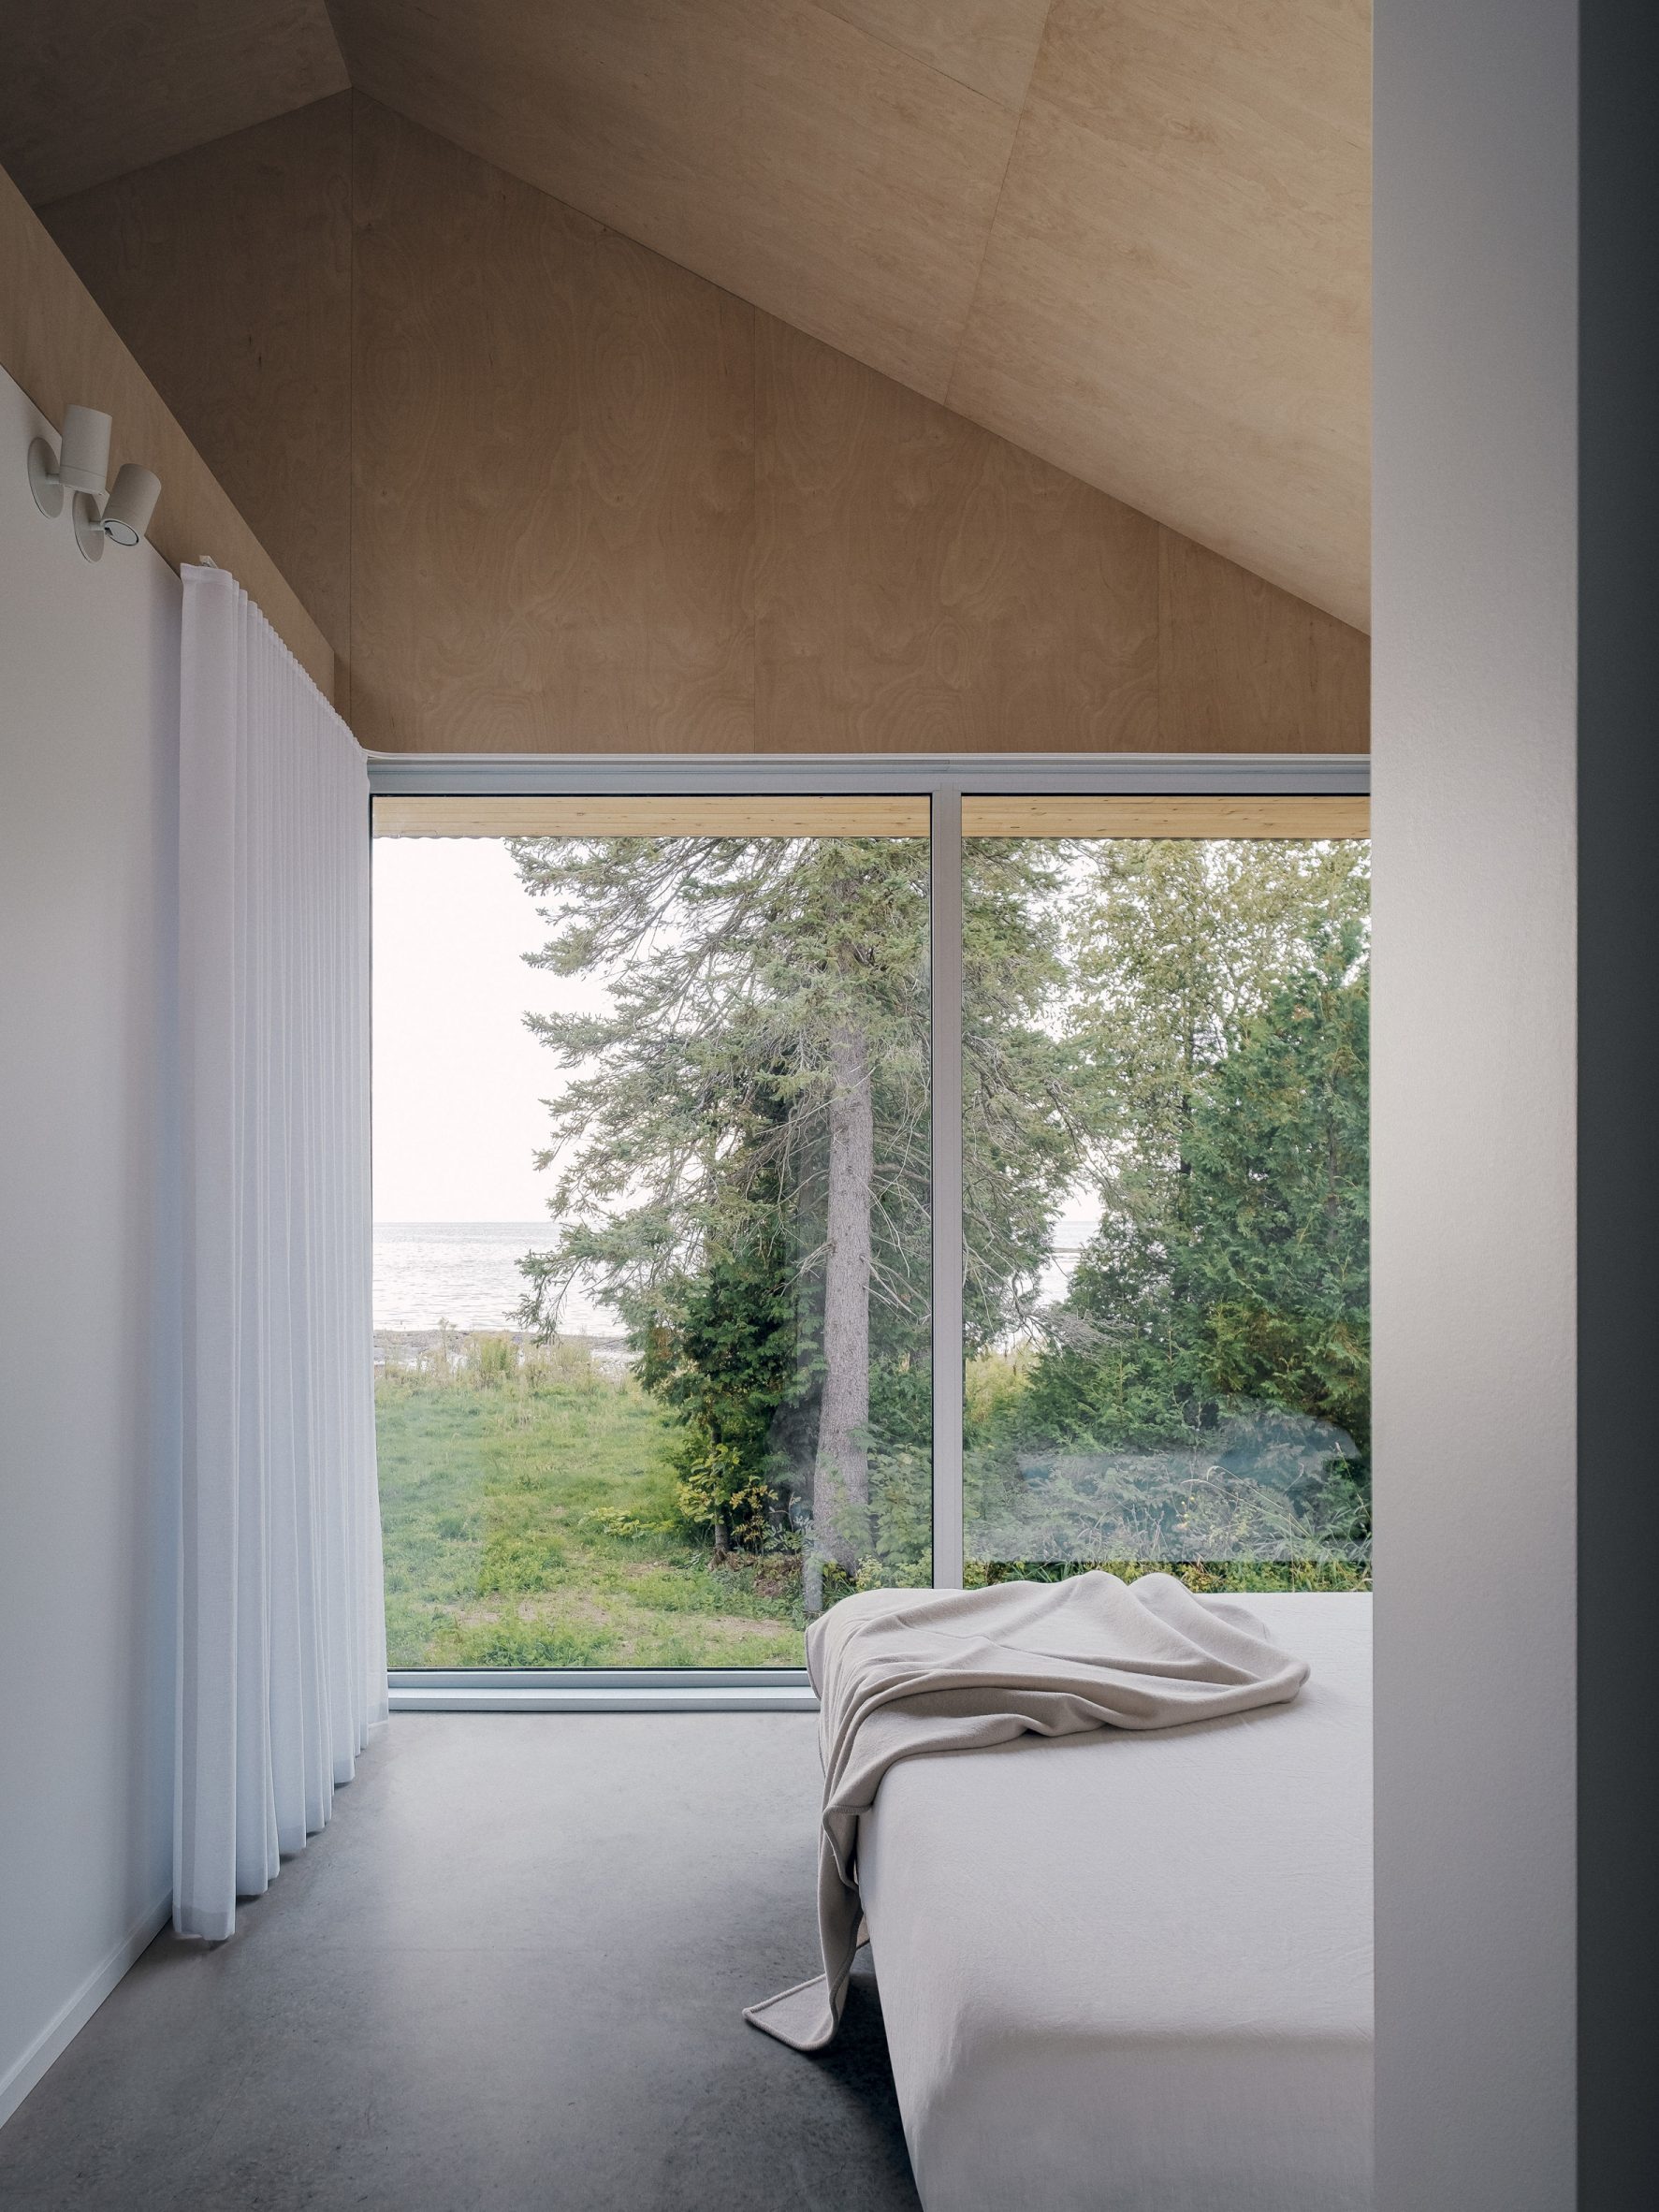 Photo of a bedroom by StudioAC